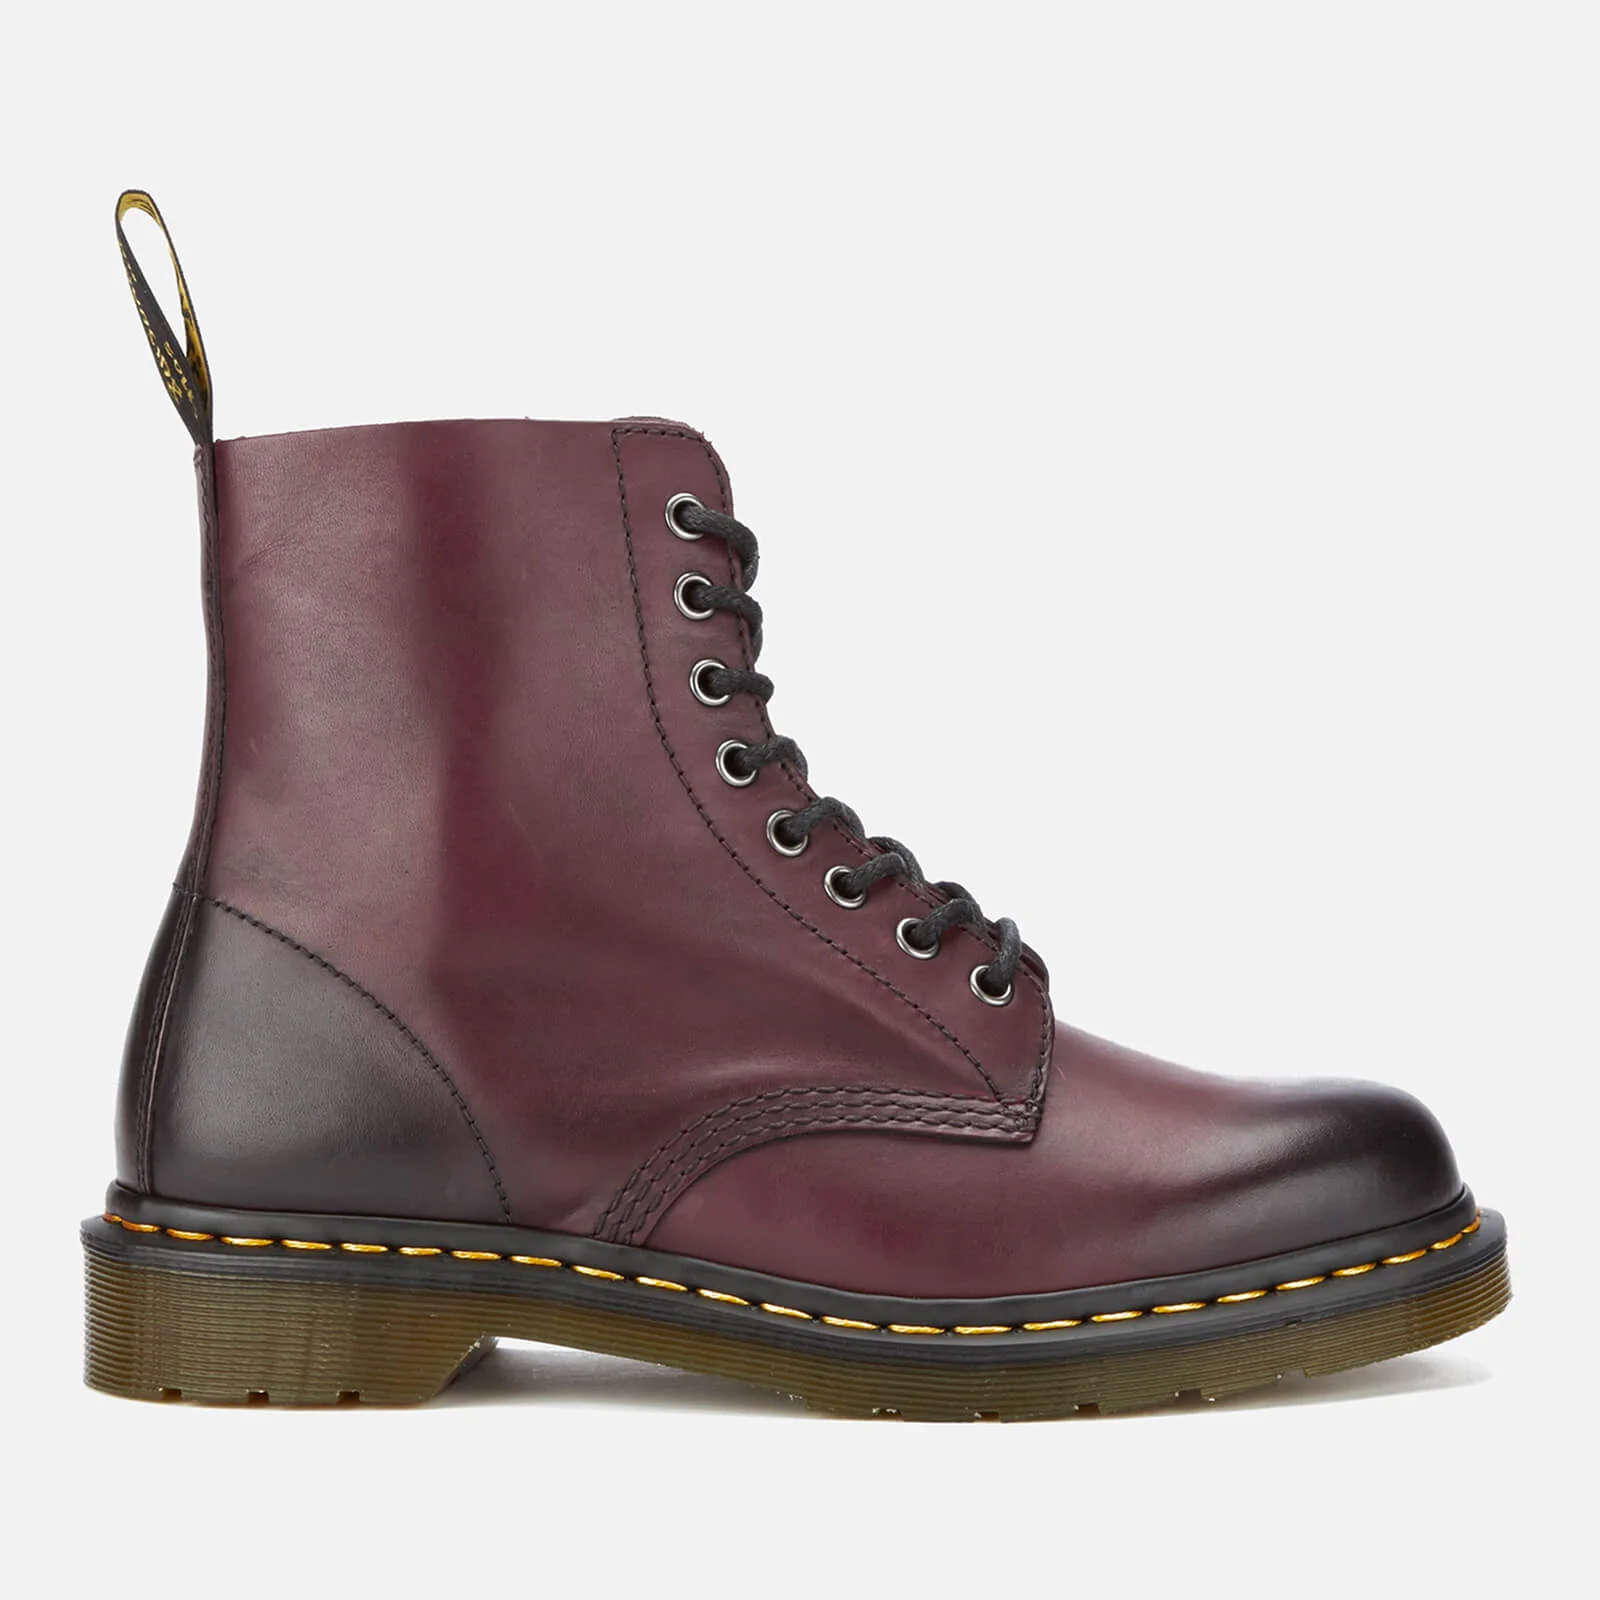 Dr. Martens Men's 1460 Pascal Antique Temperley Leather 8-Eye Boots - Cherry Red Image 1